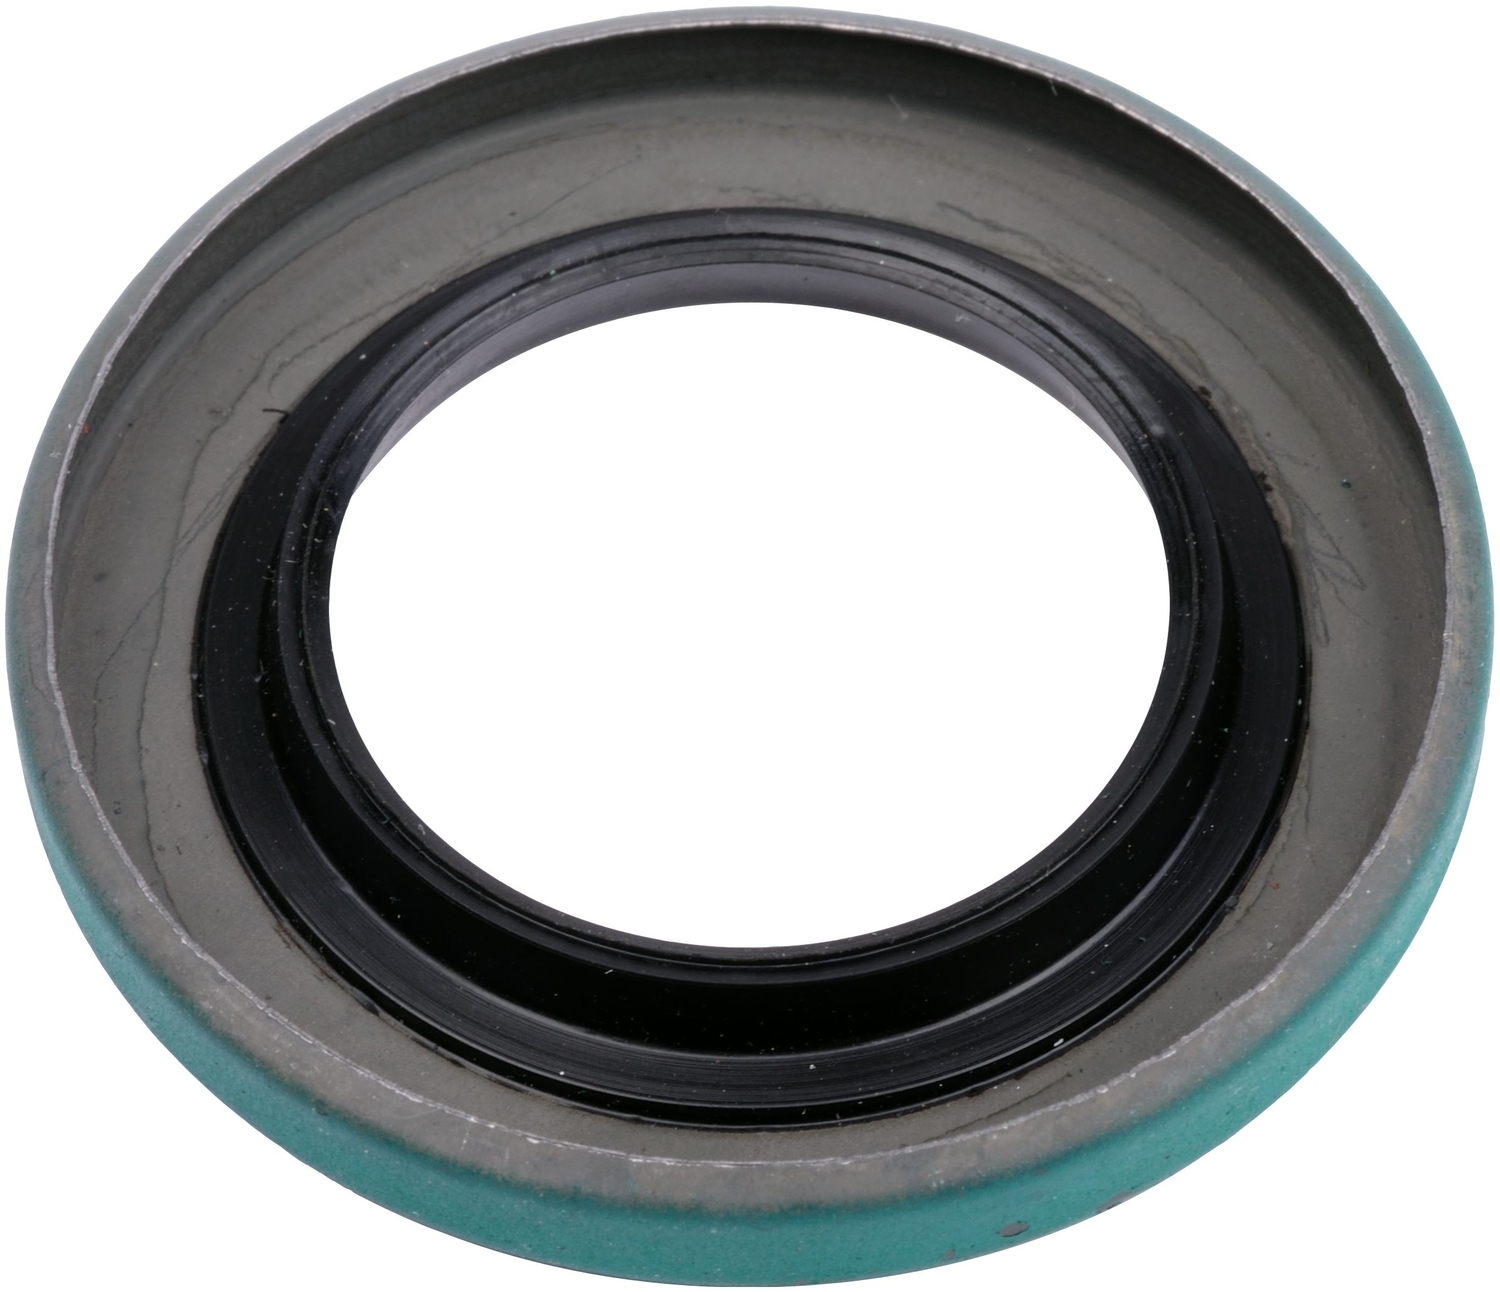 SKF (CHICAGO RAWHIDE) - Manual Trans Overdrive Solenoid Seal - SKF 3050